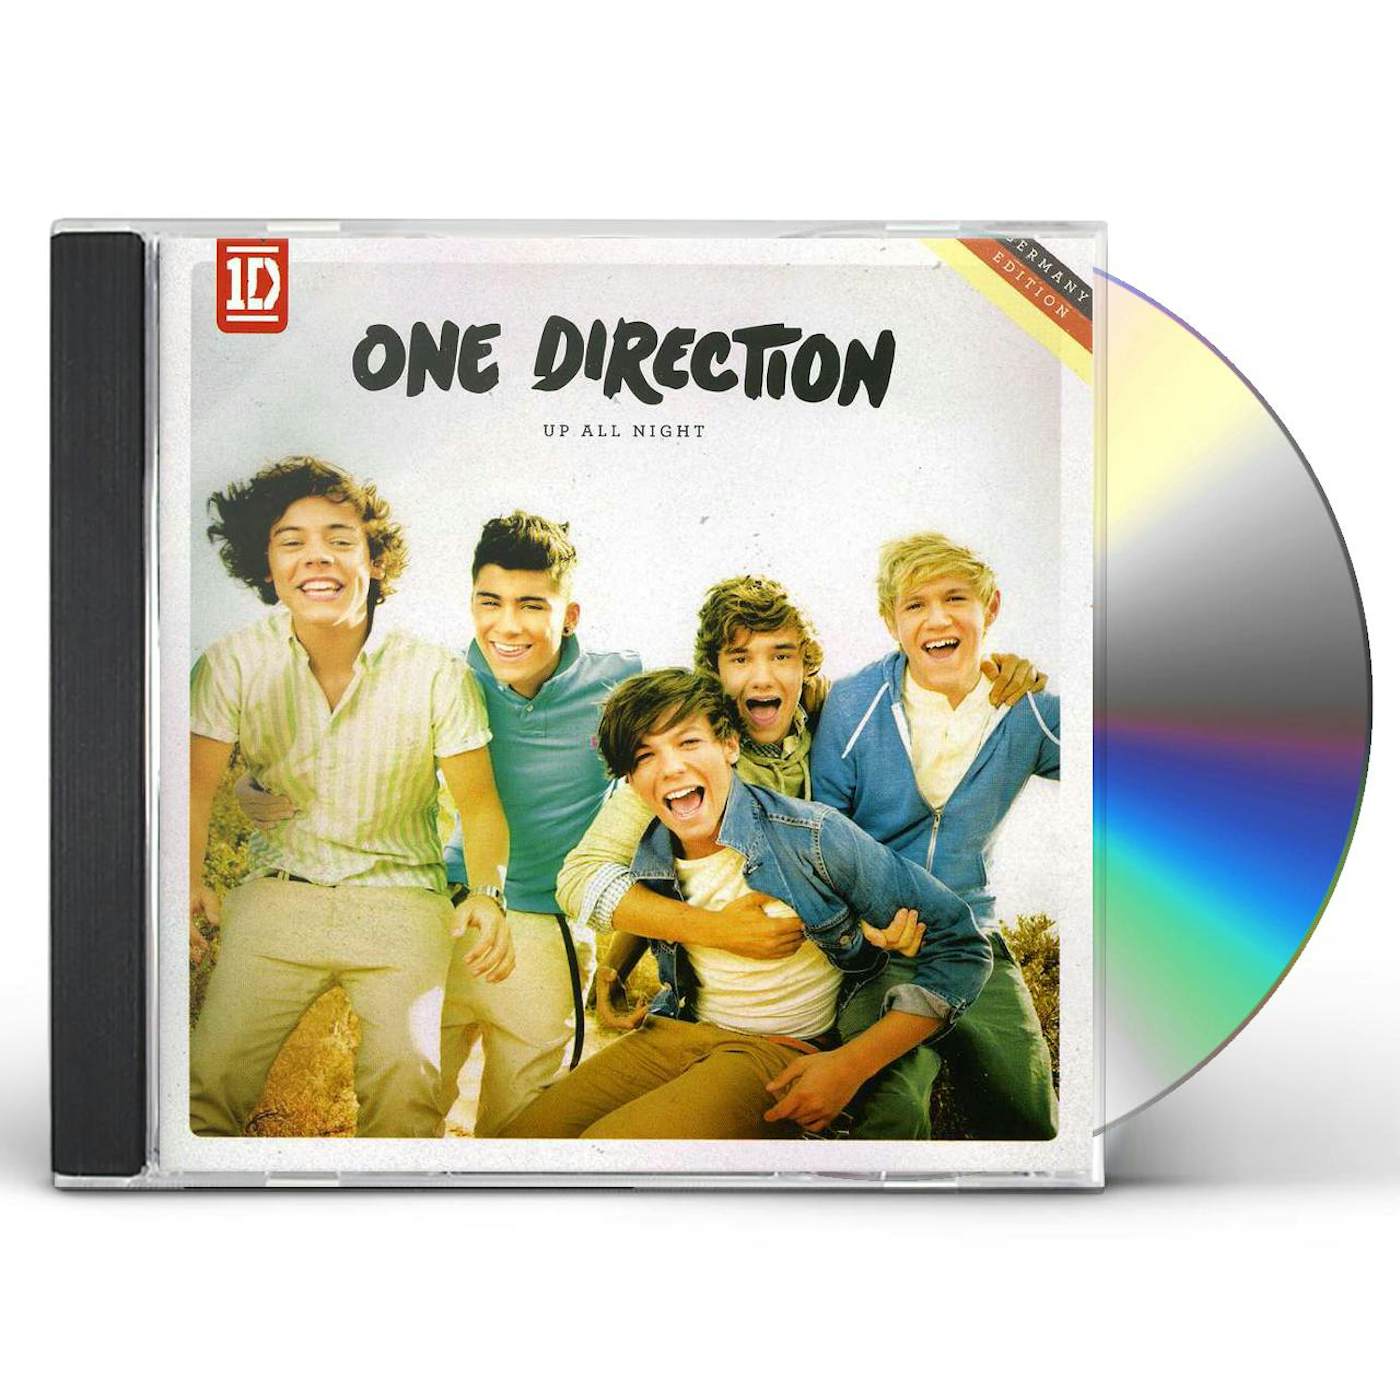 One Direction UP ALL NIGHT (GERMAN EDITION 16 TRACKS) CD